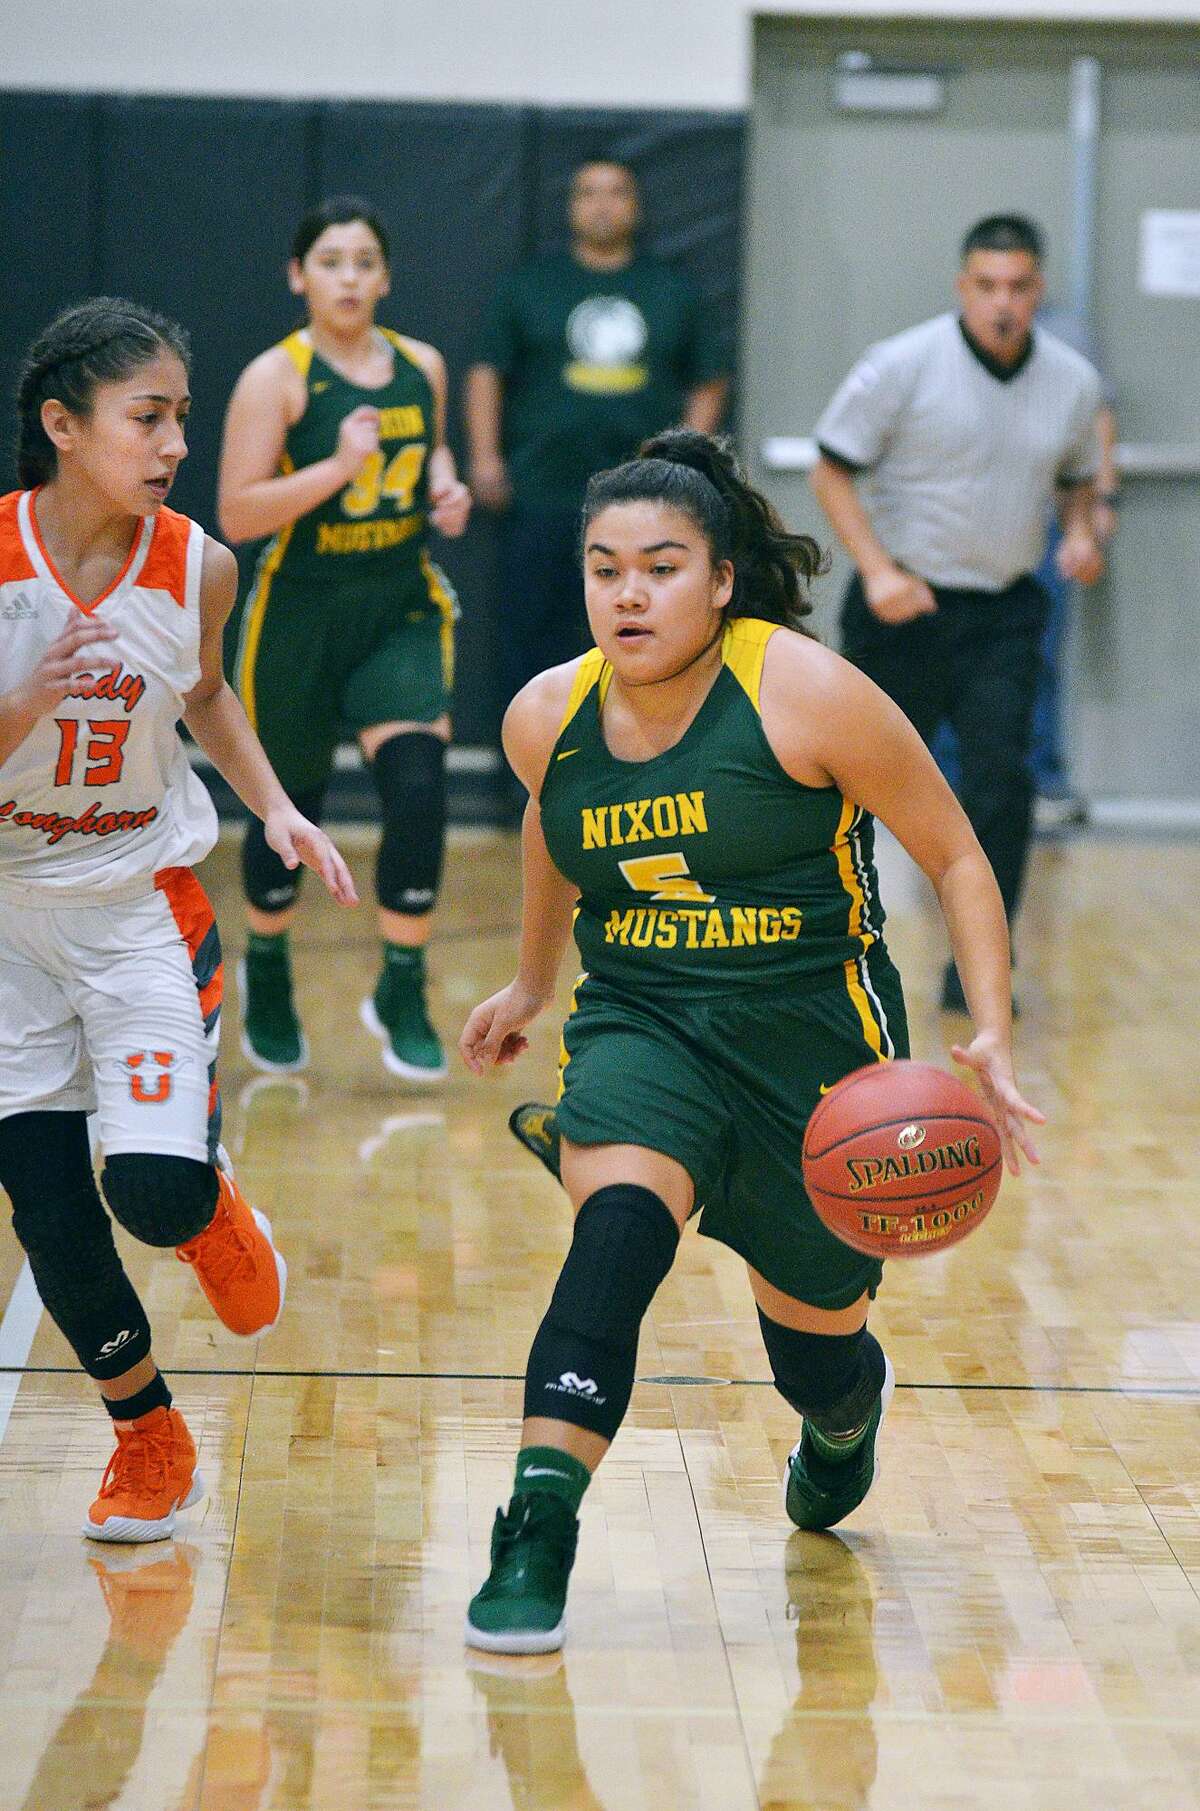 Nixon advanced to the Bronze Bracket semifinals Saturday following up an 84-41 loss to United with a 72-24 win against Cigarroa. Alyssa Mata was one of four Nixon players to score in double figures in the second game with 10 points.